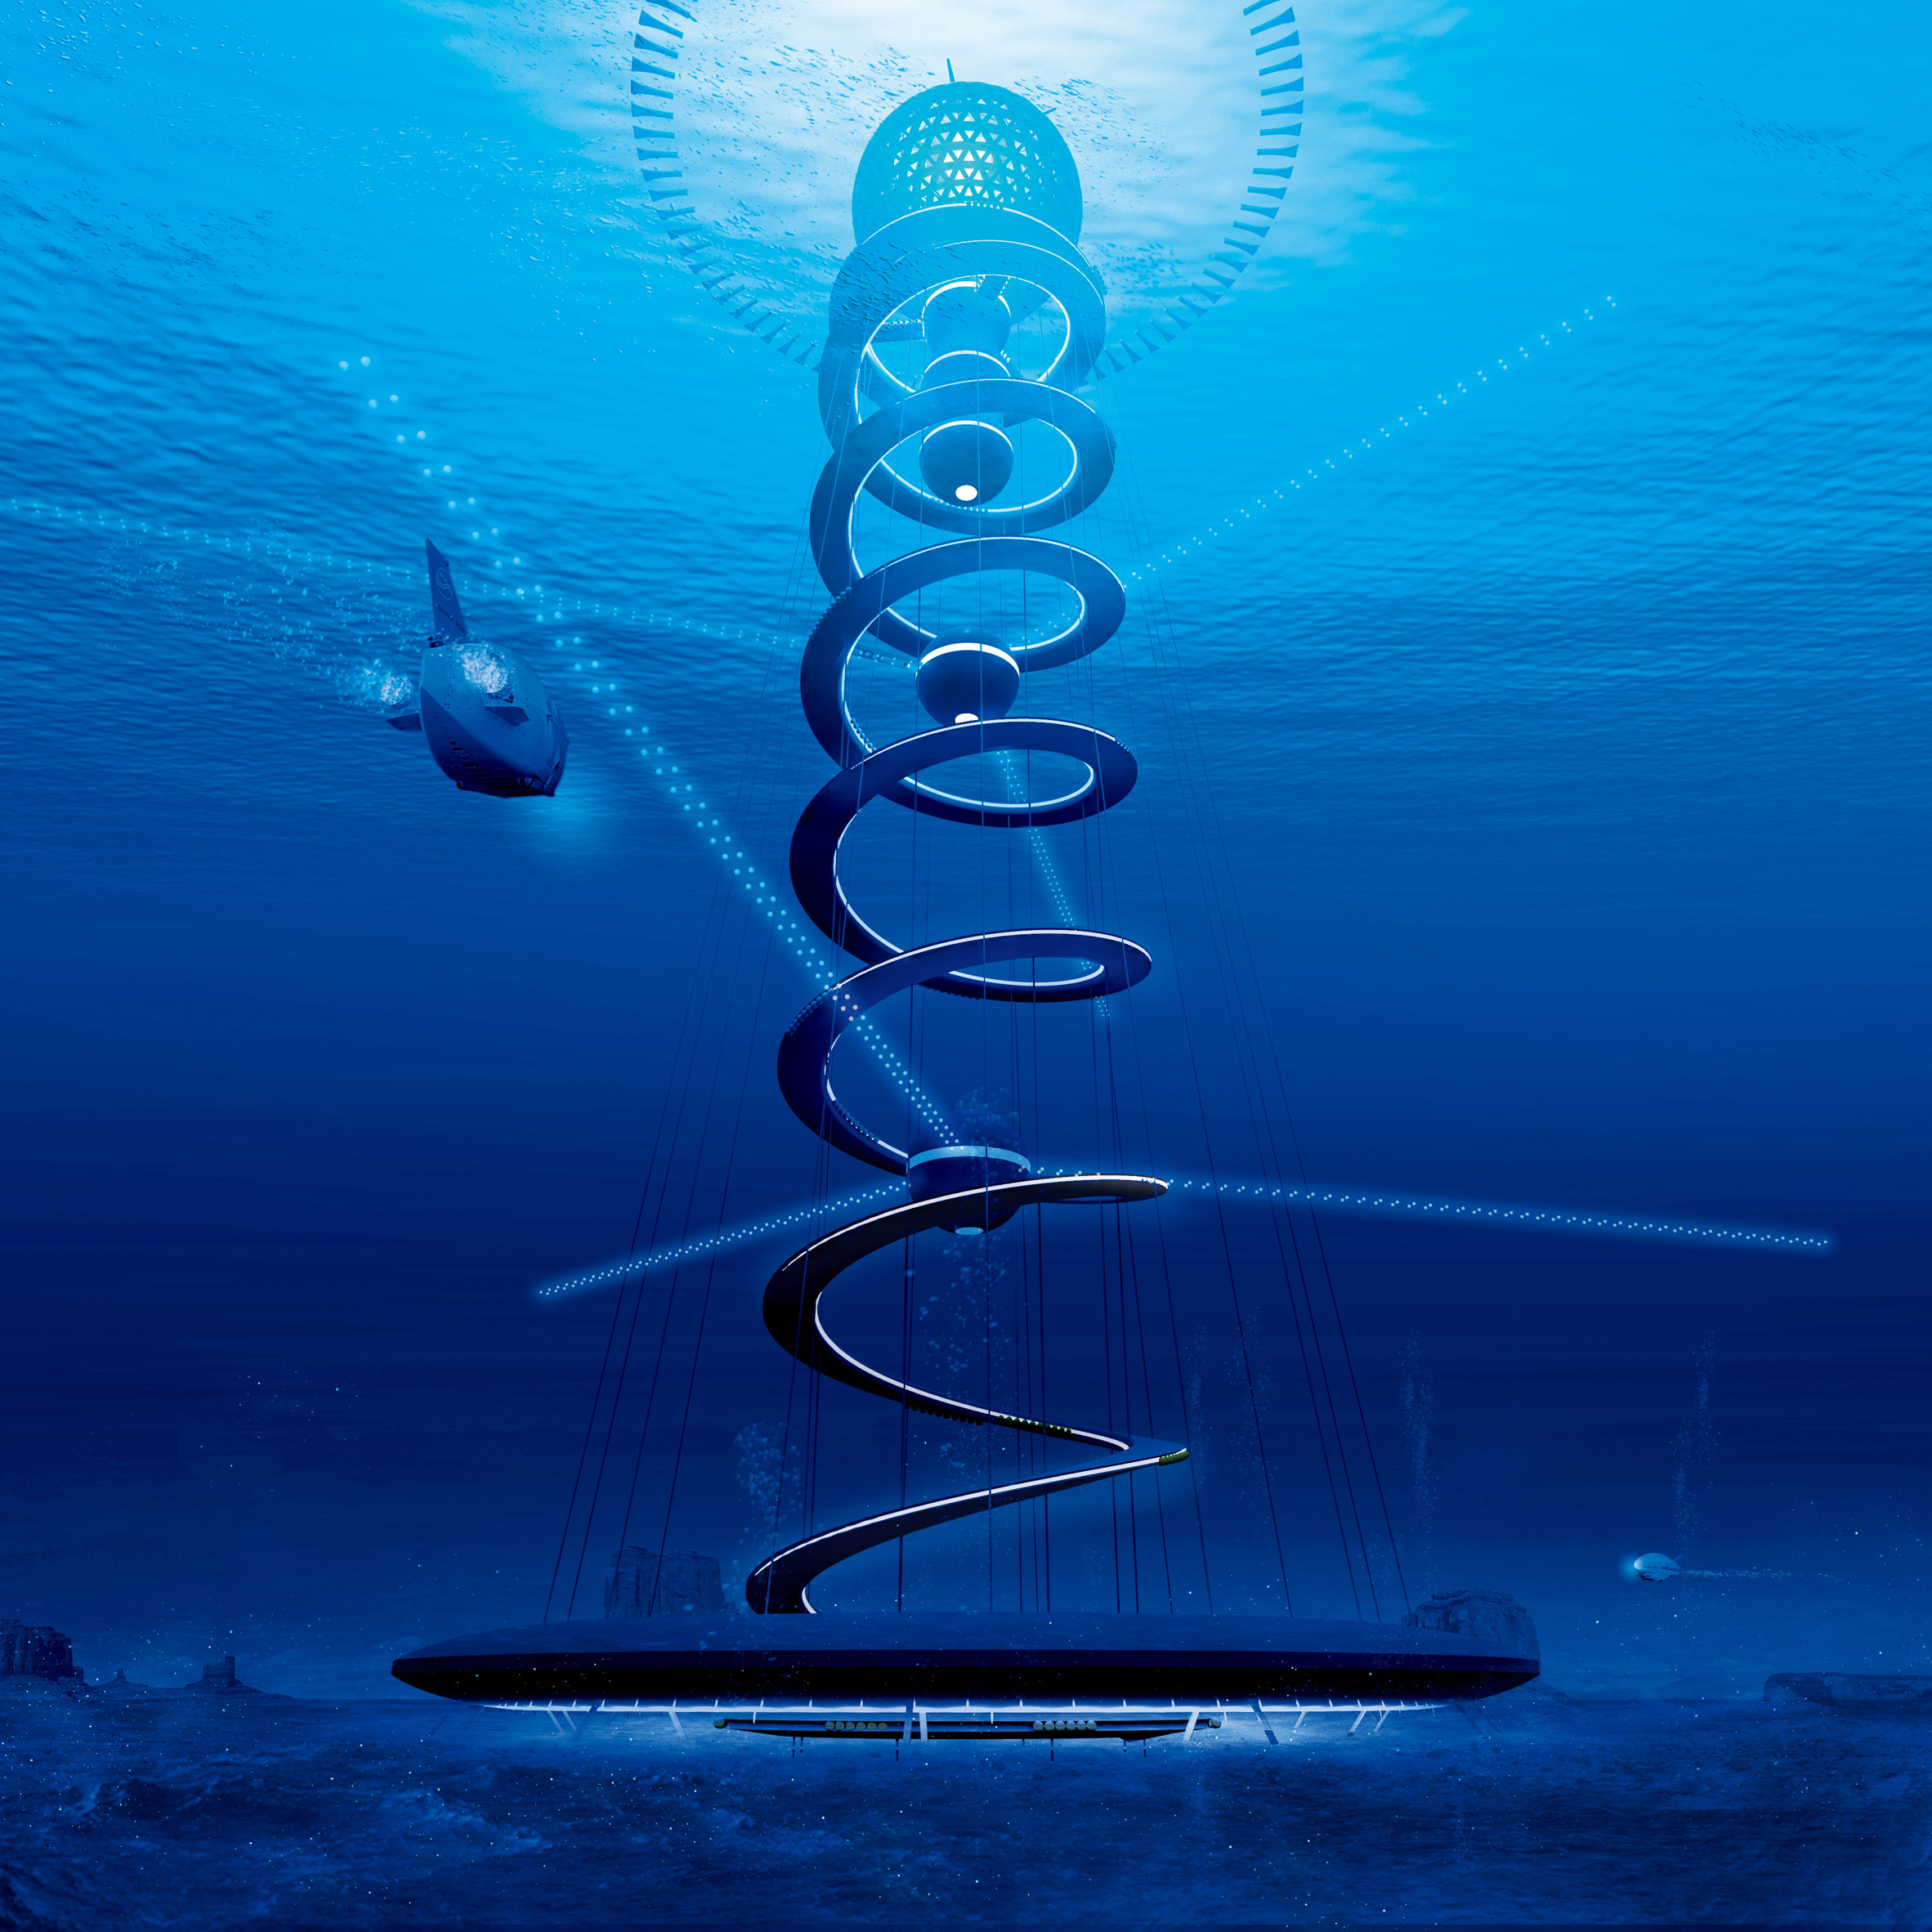 Ocean Spiral is a concept for a city beneath the surface of the ocean